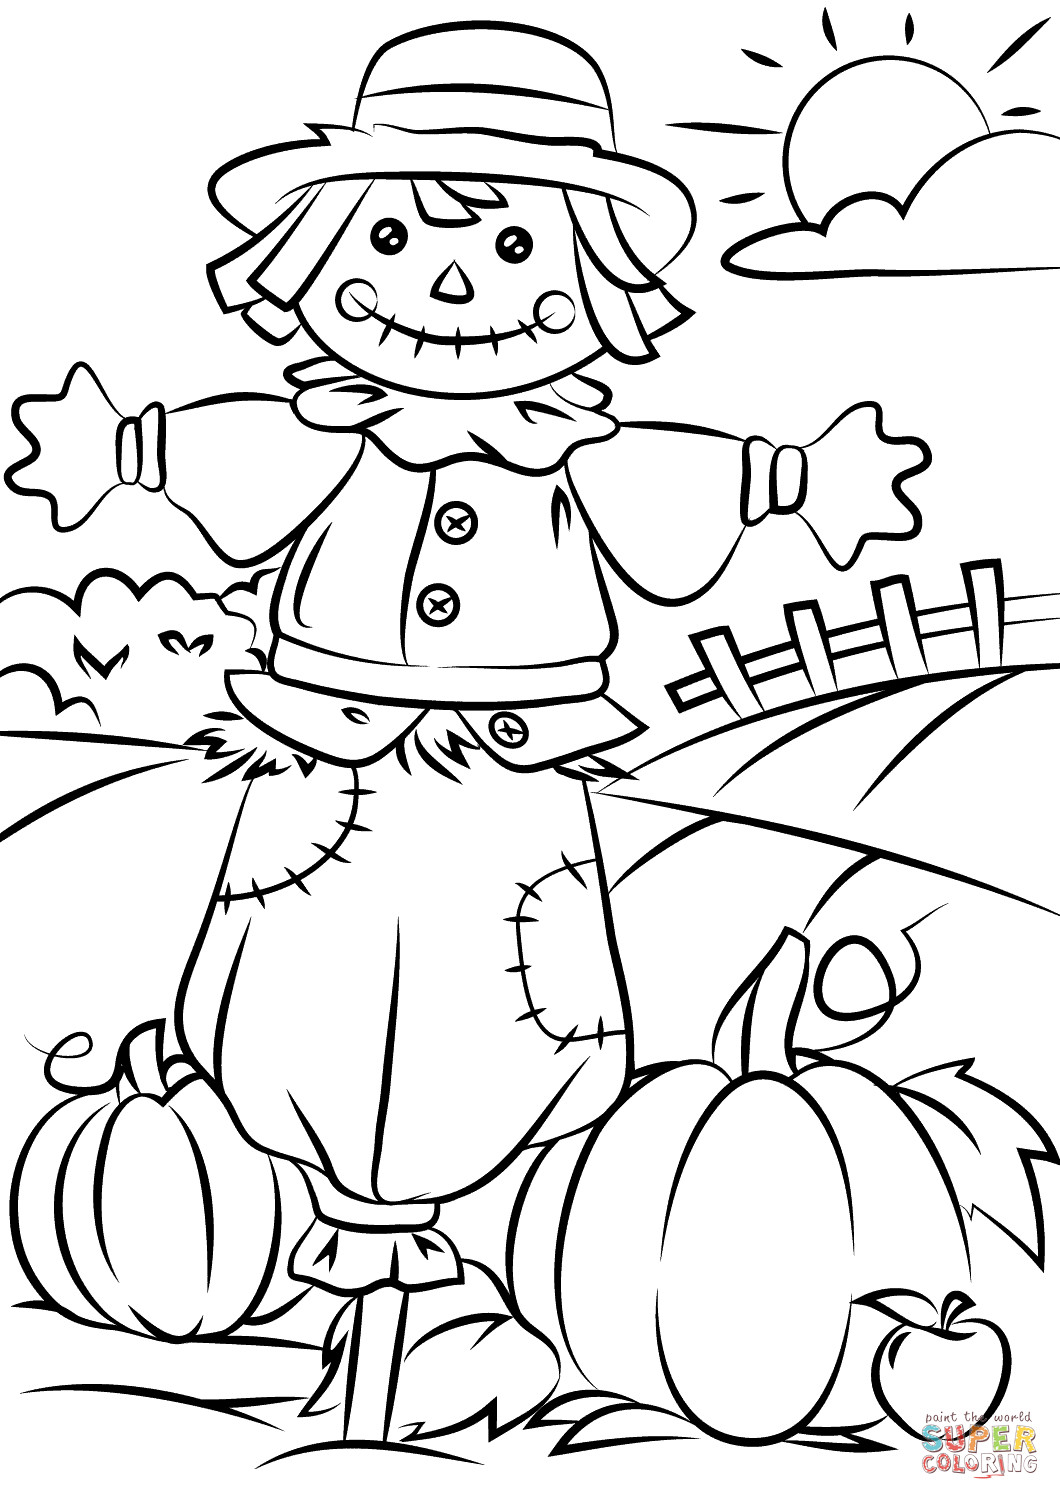 Free Printable Fall Coloring Sheets
 Autumn Scene with Scarecrow coloring page